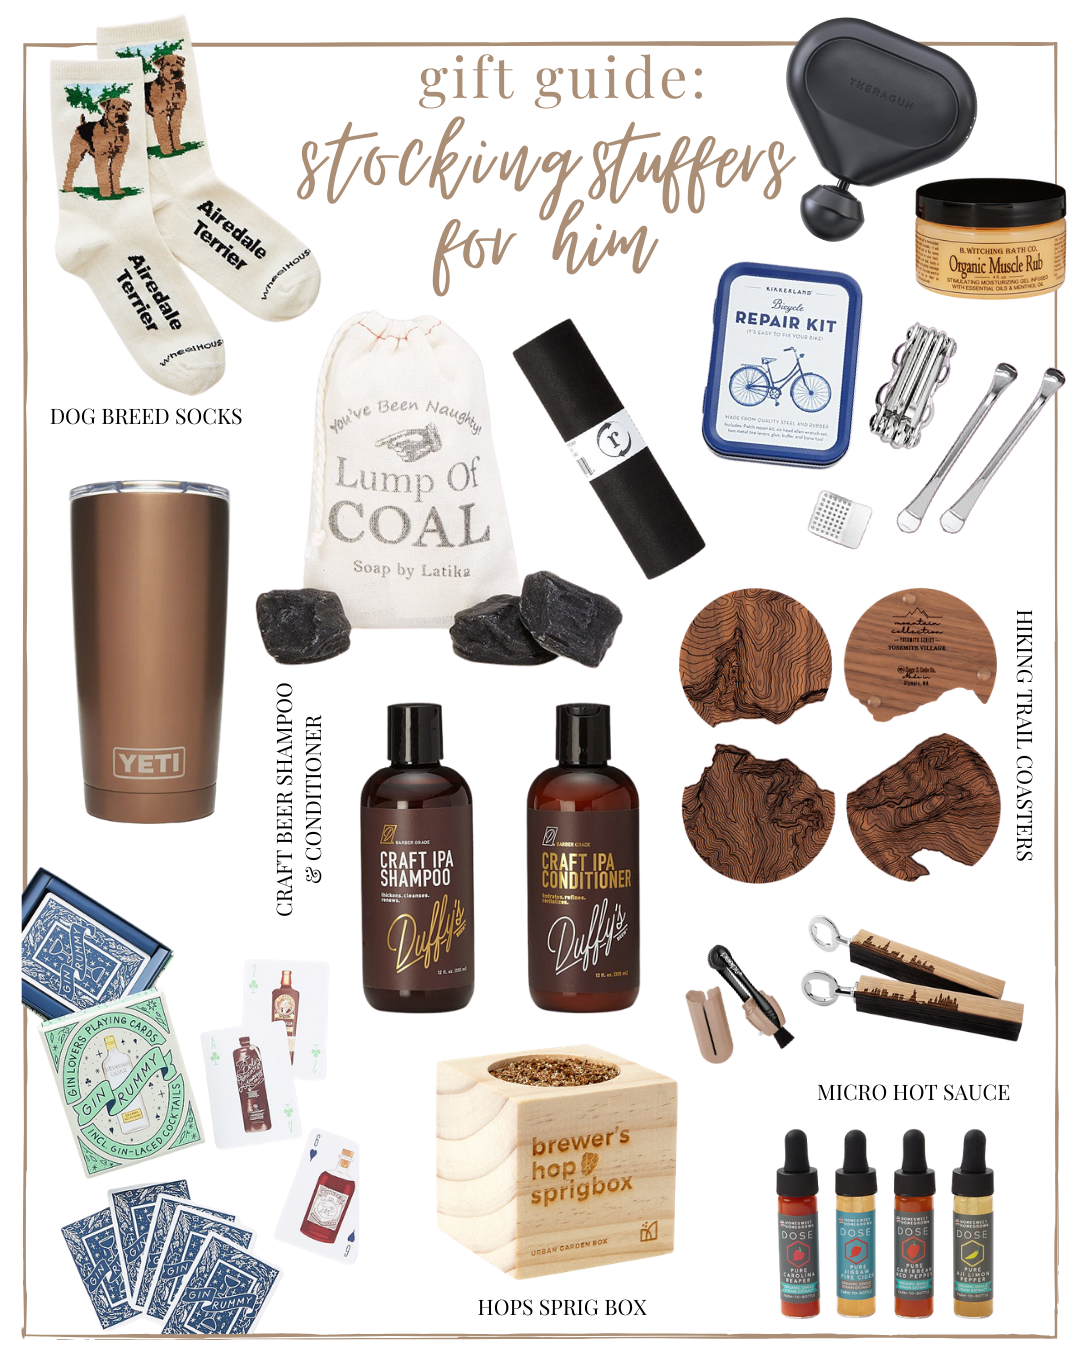 2020 Stocking Stuffers for Him & Her | 2020 Holiday Gift Guide: Stocking Stuffers for Him | 202 Stocking Stuffers | Louella Reese